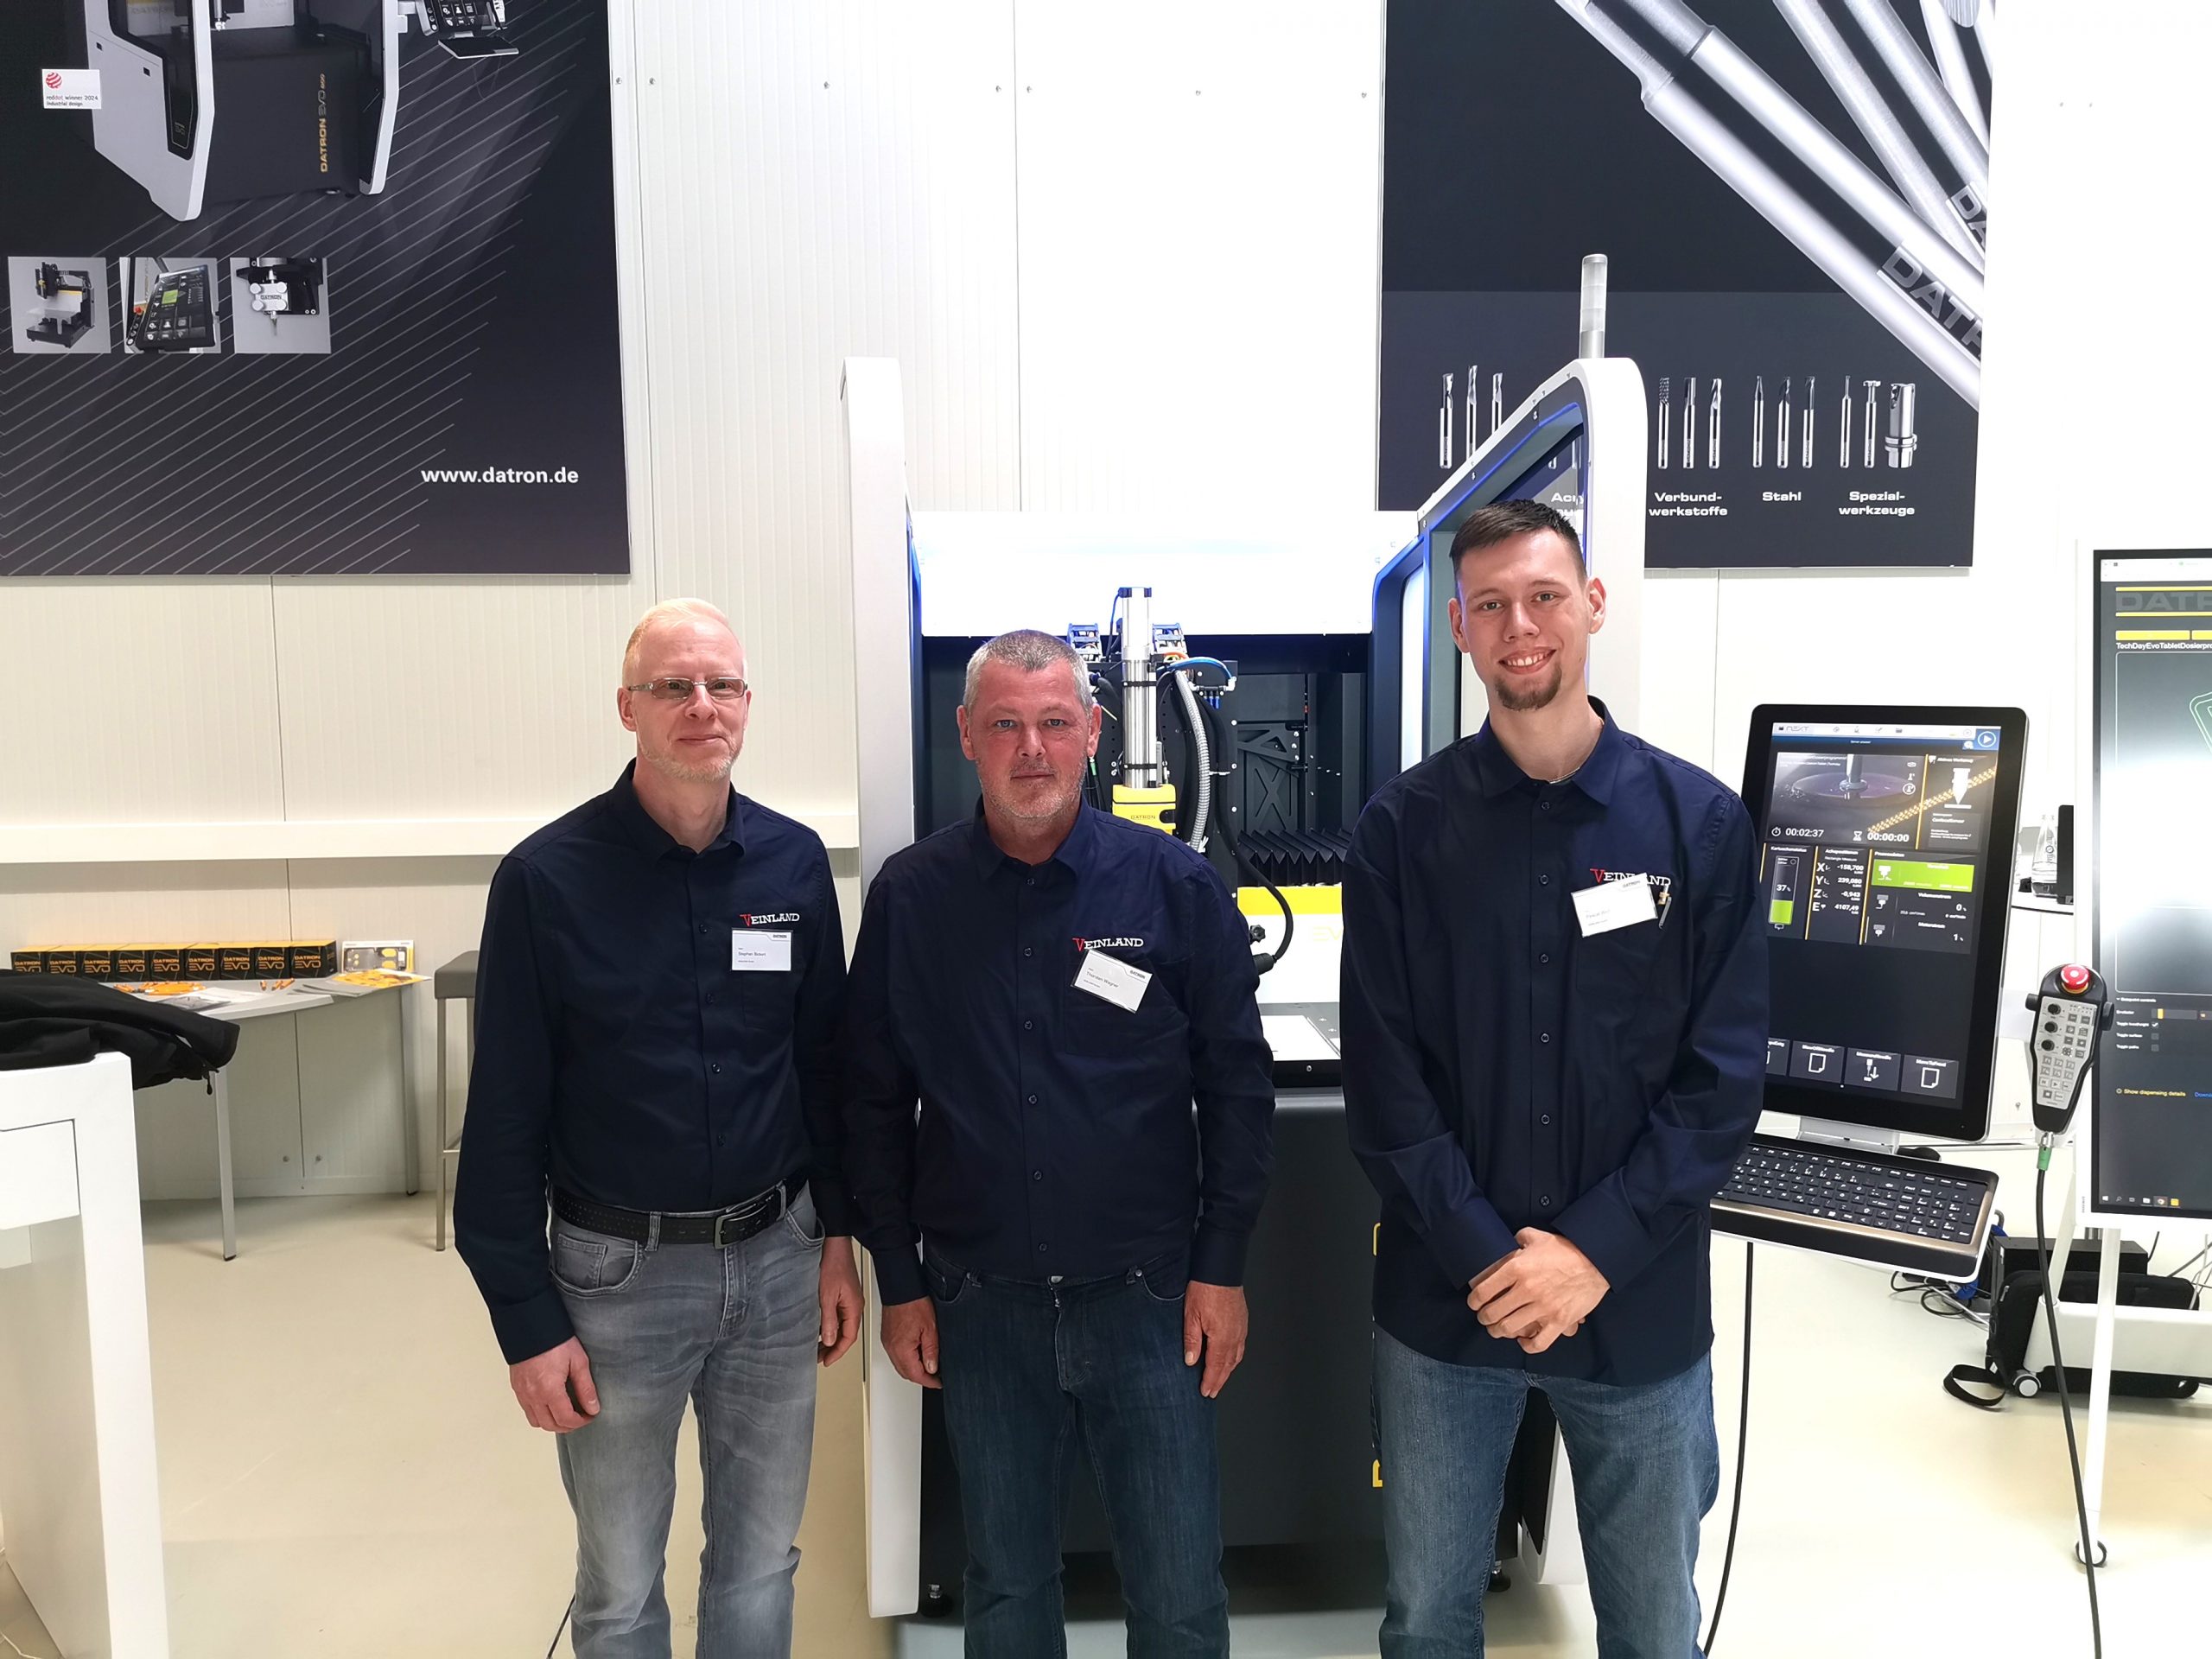 Open Day at Datron AG in Potsdam